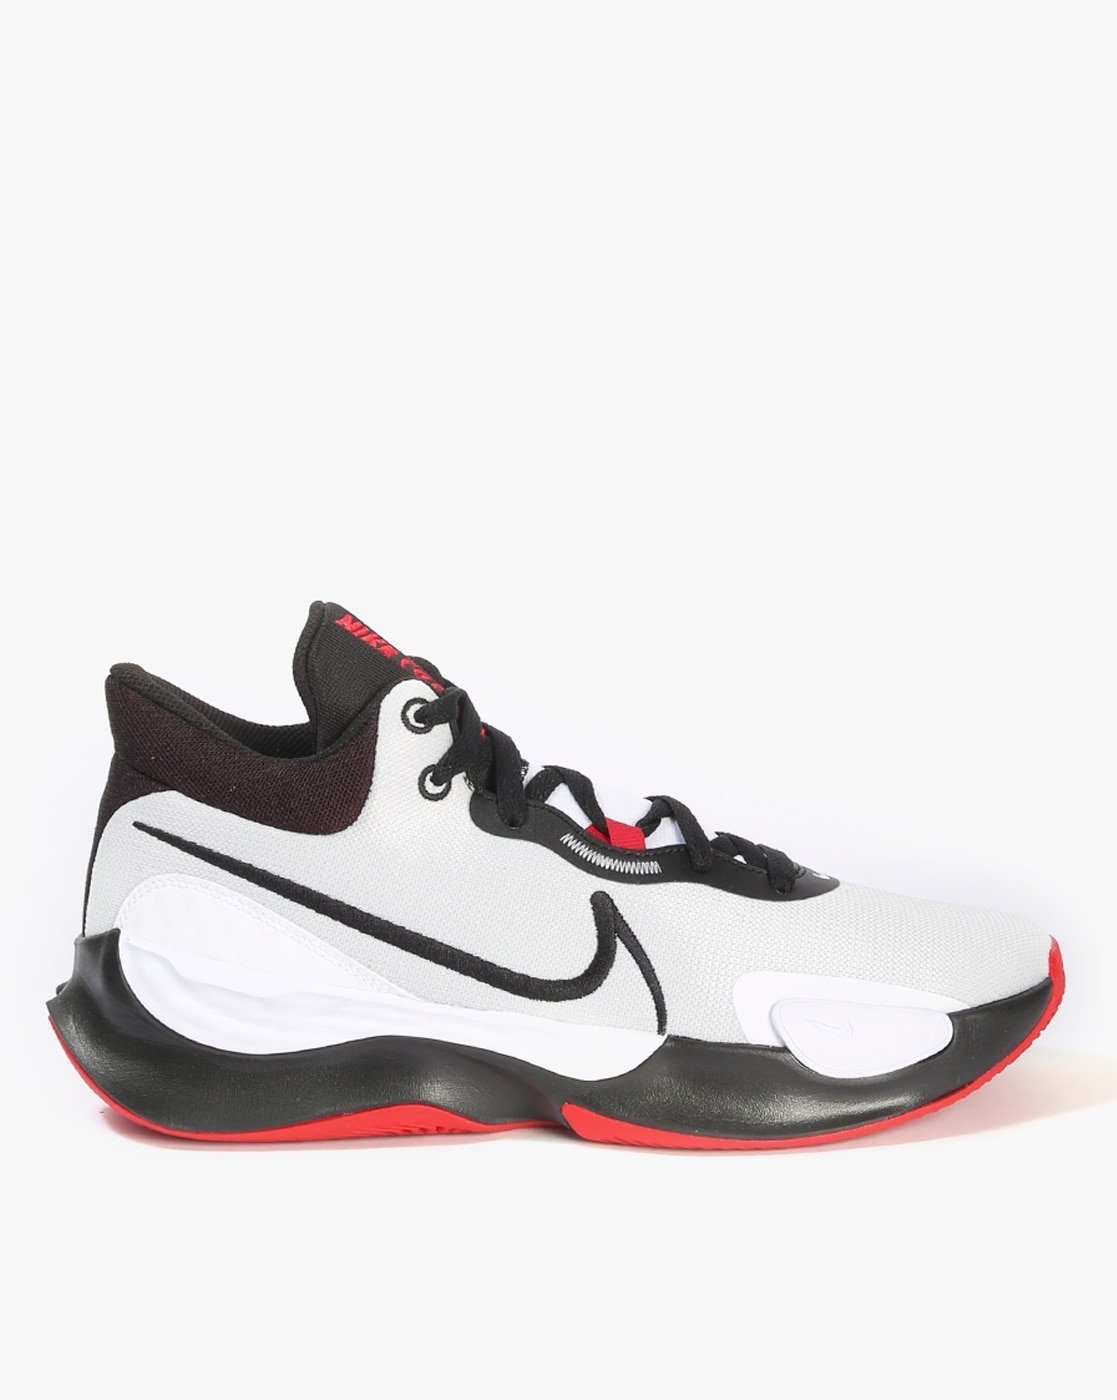 NIKE NK Renew Elevate 3 Basketball Shoes Basketball Shoes For Men - Buy NIKE  NK Renew Elevate 3 Basketball Shoes Basketball Shoes For Men Online at Best  Price - Shop Online for